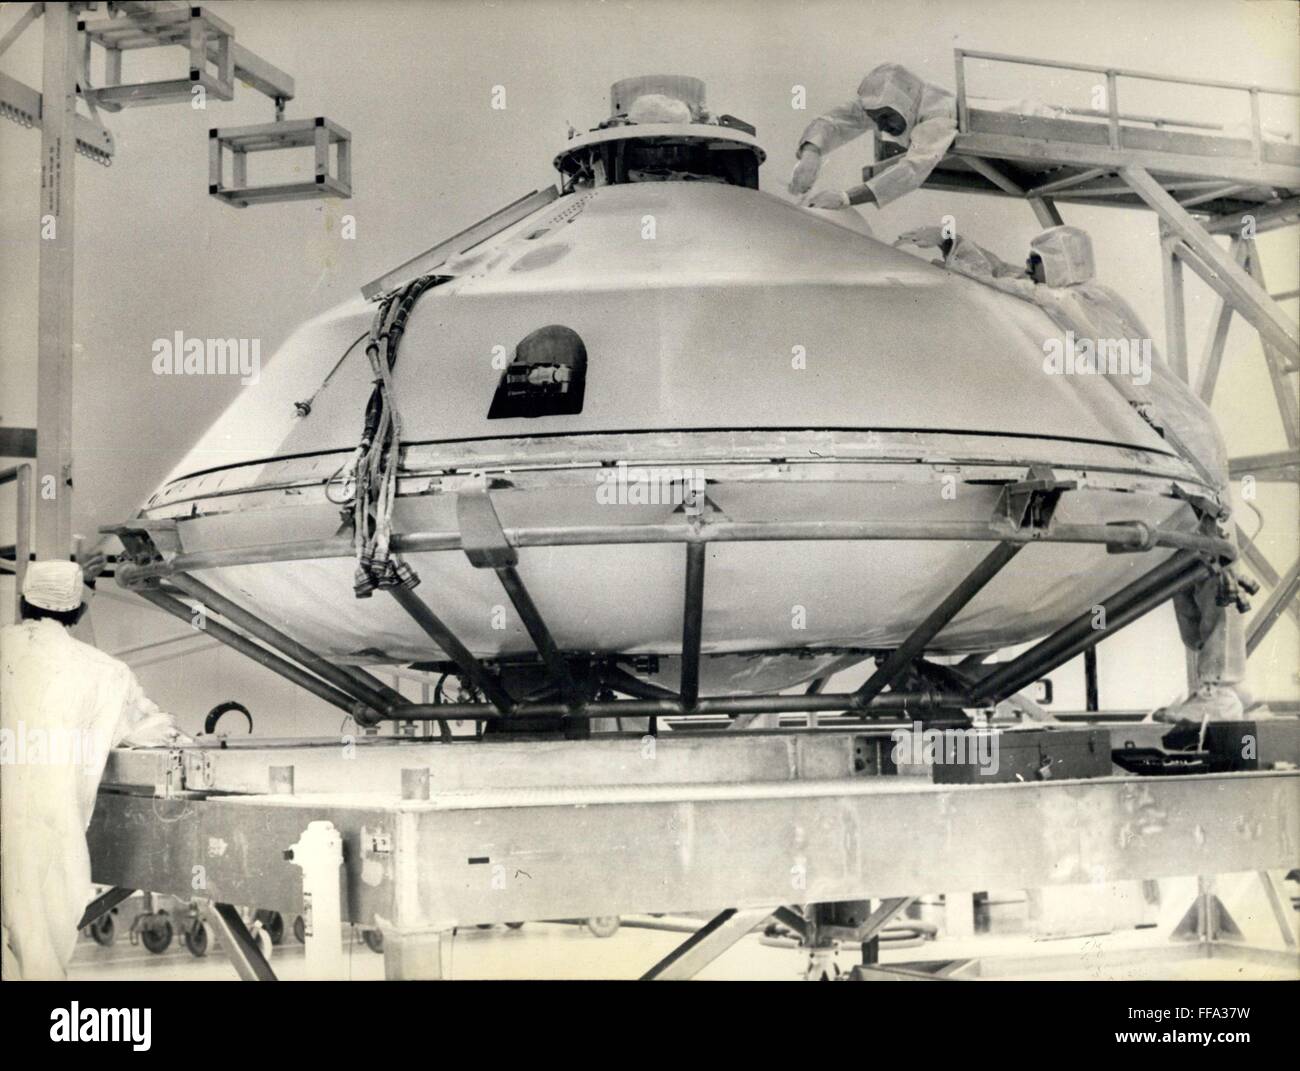 1975 - To Land On Mars: The Viking Lander Capsule (VLC - 1) seen at the Spacecraft Assembly and Encapsulation Building at Kennedy Space Center, Florida. This flight Capsule to be launched to Mars this year will be ''baked'' at 113 degree C (236 degree F) for 40 hours before launch to prevent contamination of Mars With Earth's organism and to prevent erroneous detection of of Martian life. The Viking mission calls for two unmanned spacecraft to traverse some 460 million miles from Earth t make a soft landing on Mars. Reach of the spacecraft will carry a life-detecting laboratory. In addition yo Stock Photo